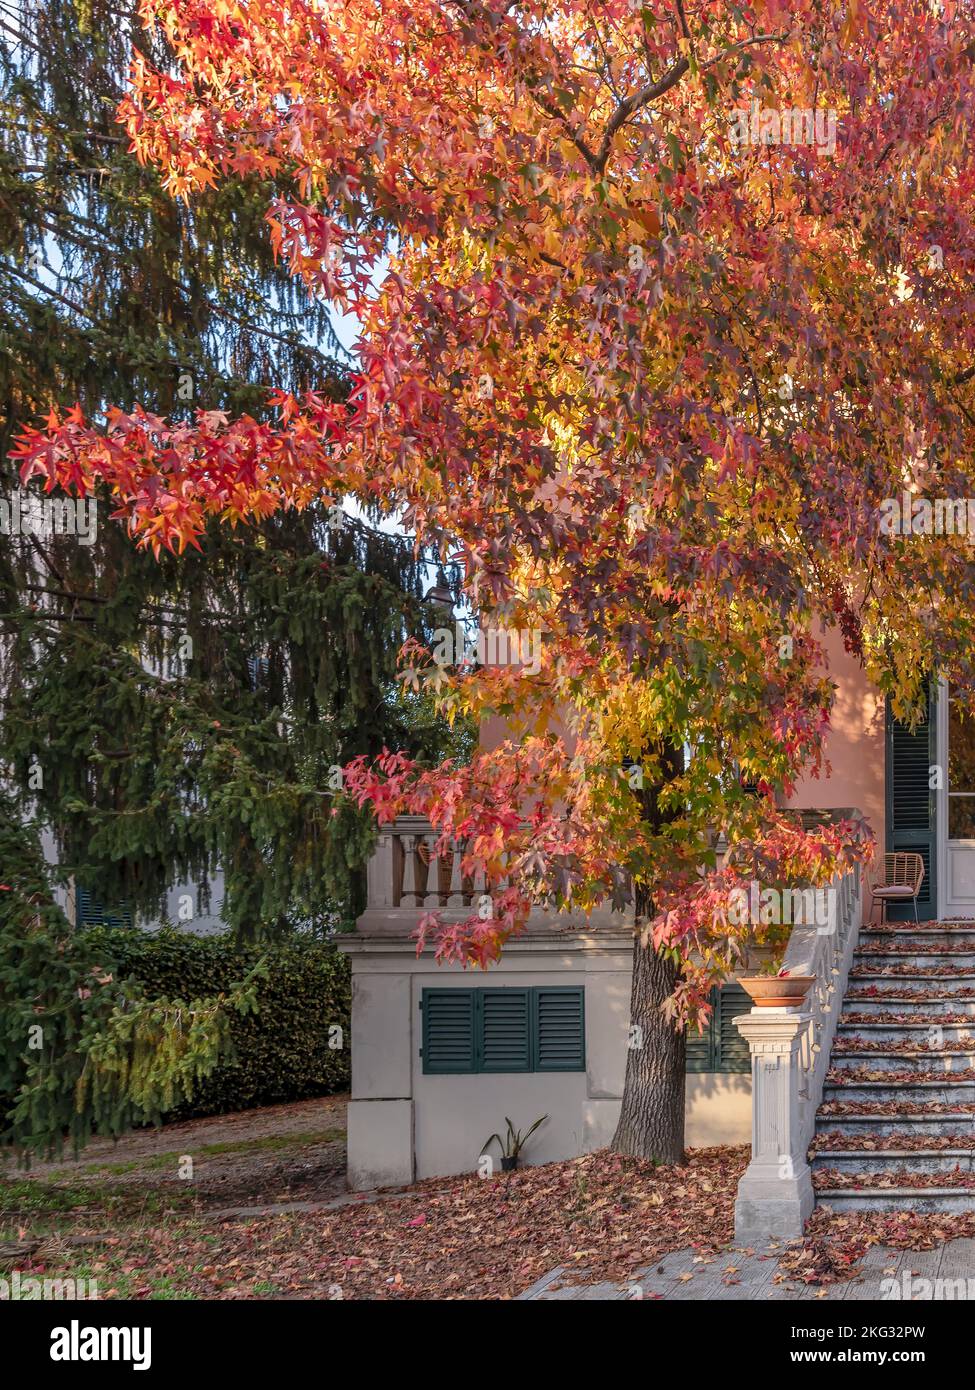 A beautiful tree with colorful autumn leaves, which falling to the ground cover the garden and the stairs of a house, Lucca, Italy Stock Photo